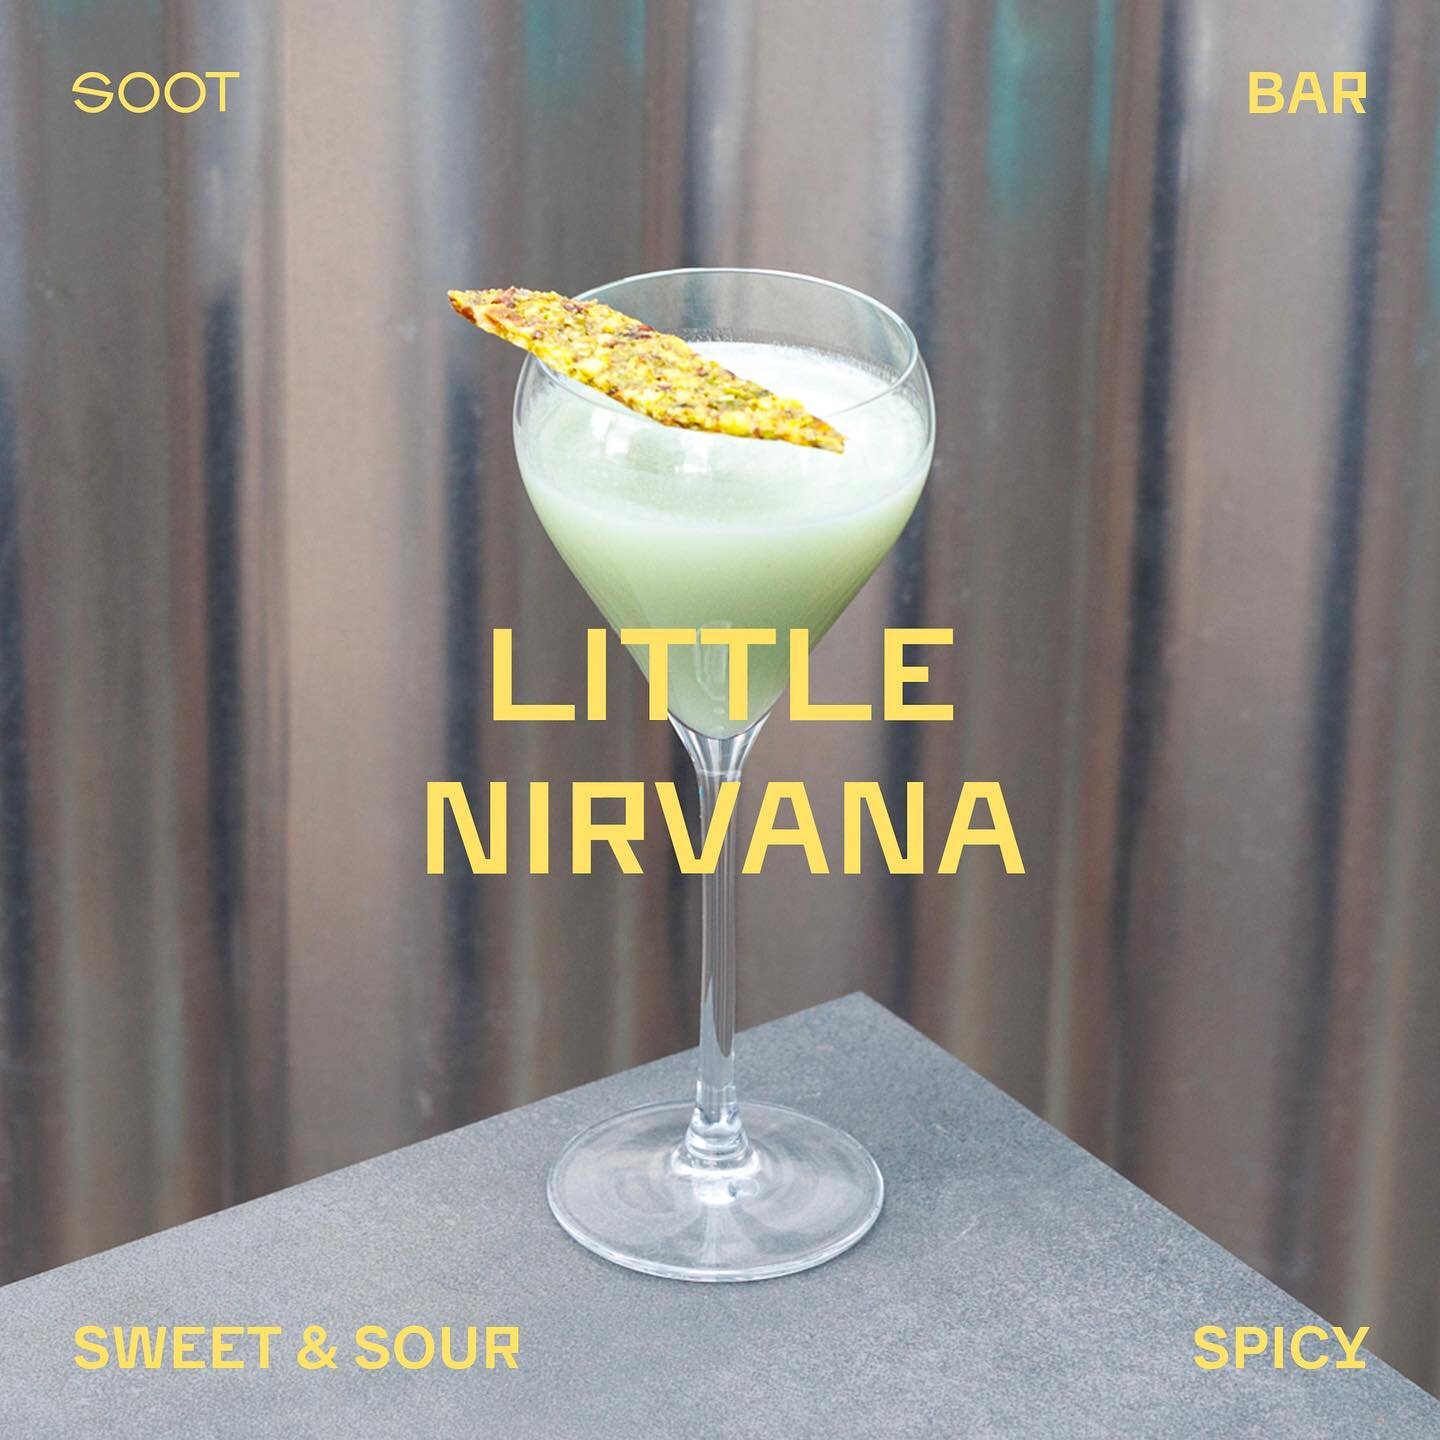 Ready for a little escape? Our Little Nirvana cocktail will transport you to a state of cocktail bliss. Savor the creamy, nutty taste of our homemade pistachio cream perfectly paired with the exotic, herbaceous notes of Skinos Greek masticha liqueur.